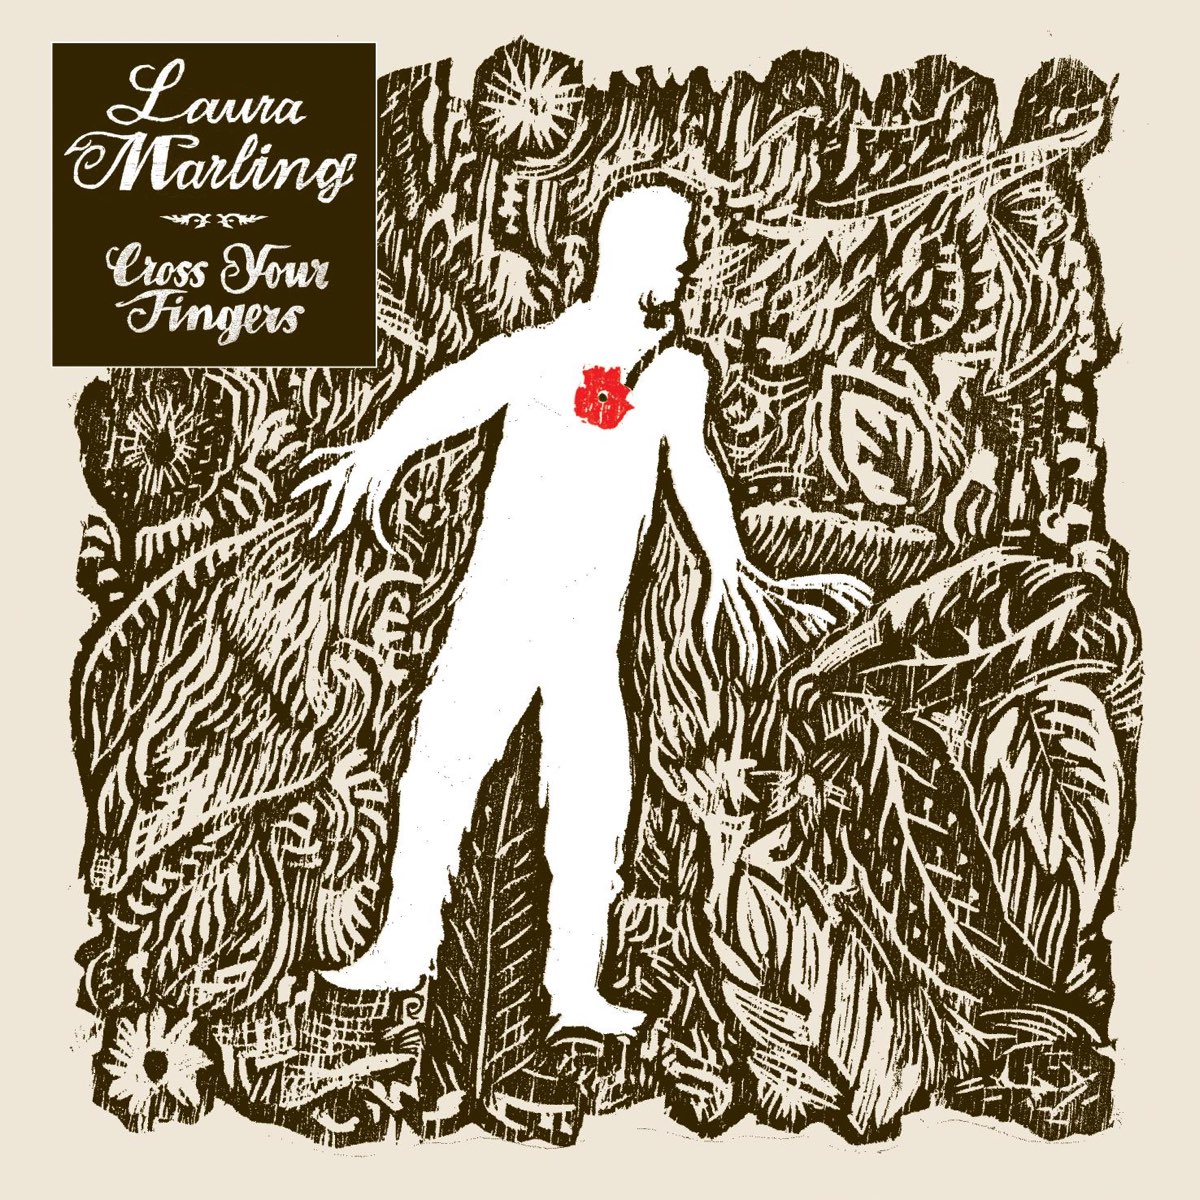 Laura Marling Cross Your Fingers cover artwork